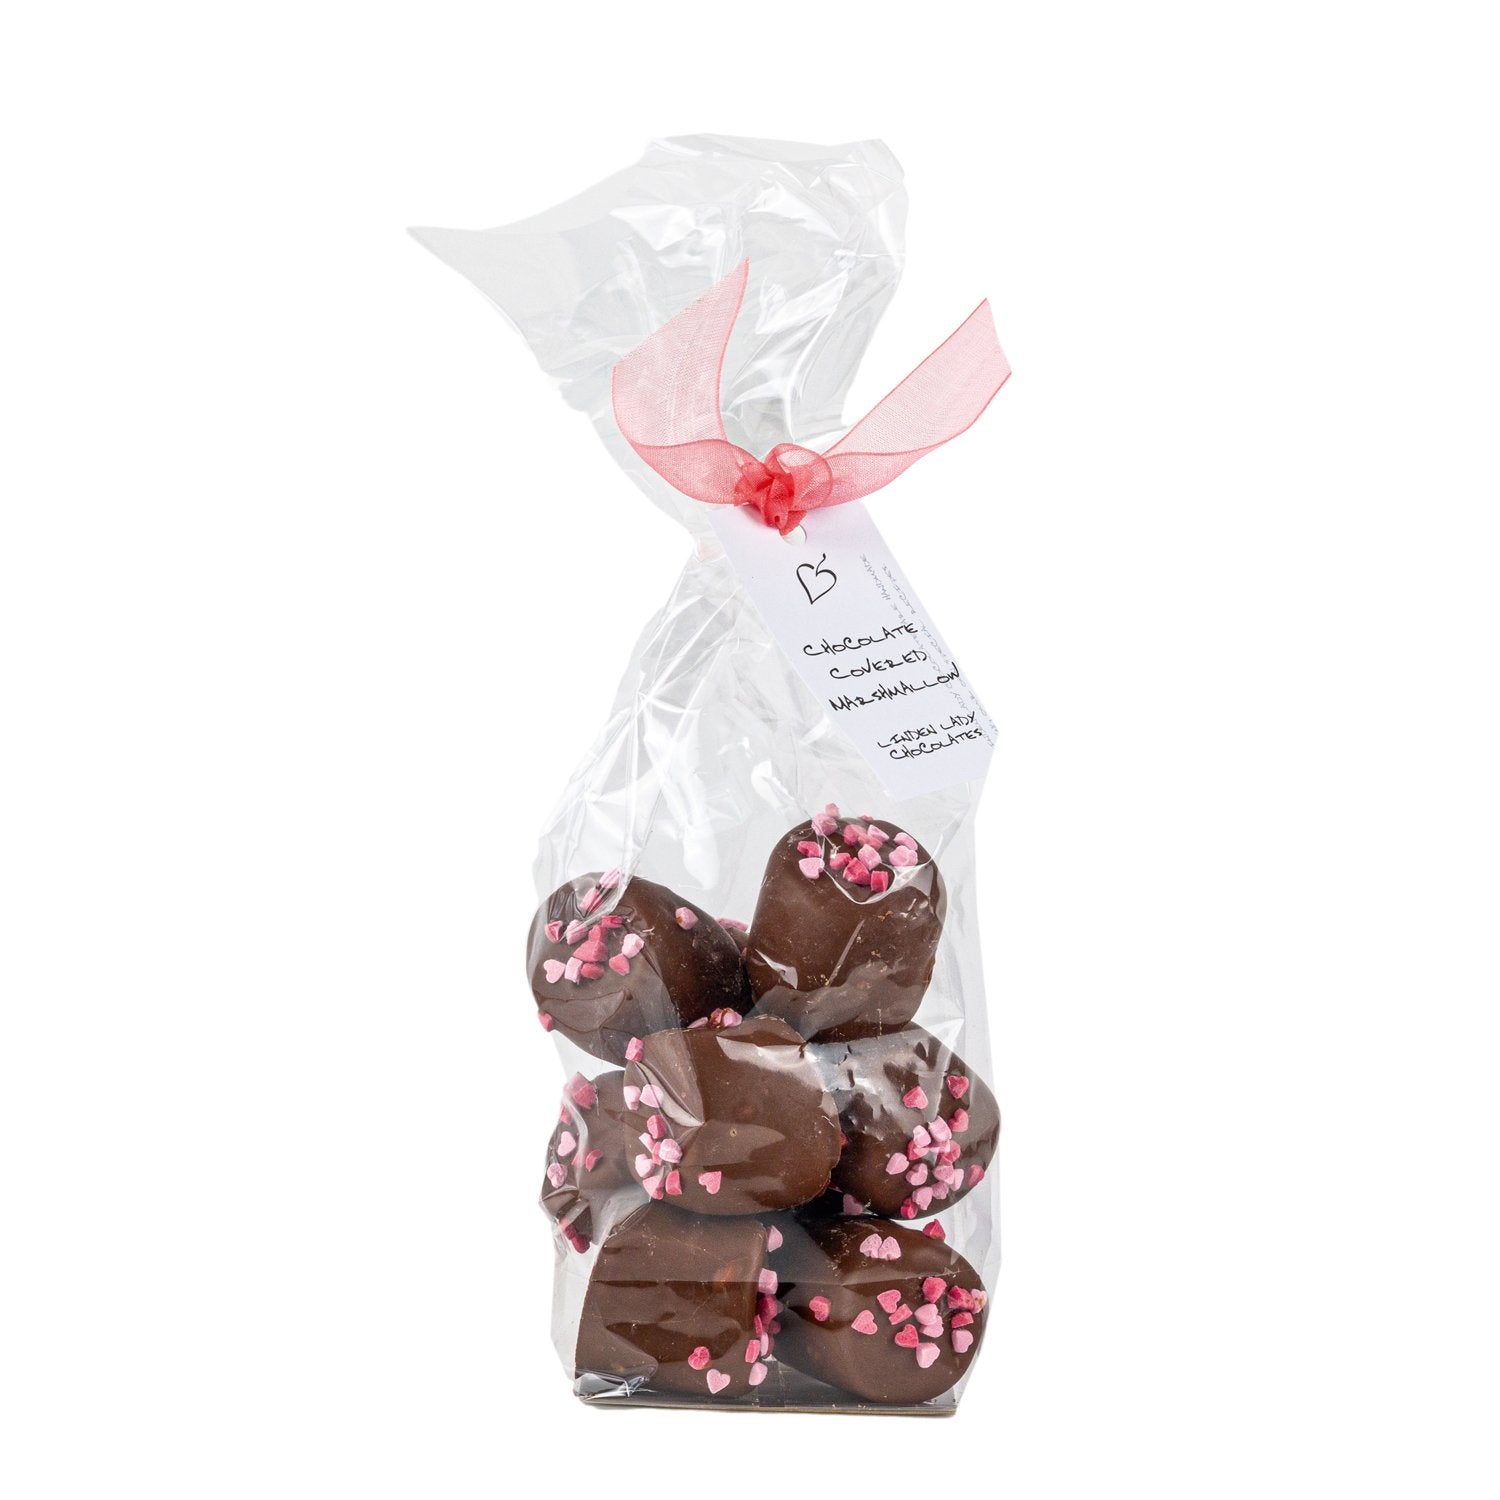 Linden Lady - Gift Bag of Milk Chocolate Covered Marshmallows